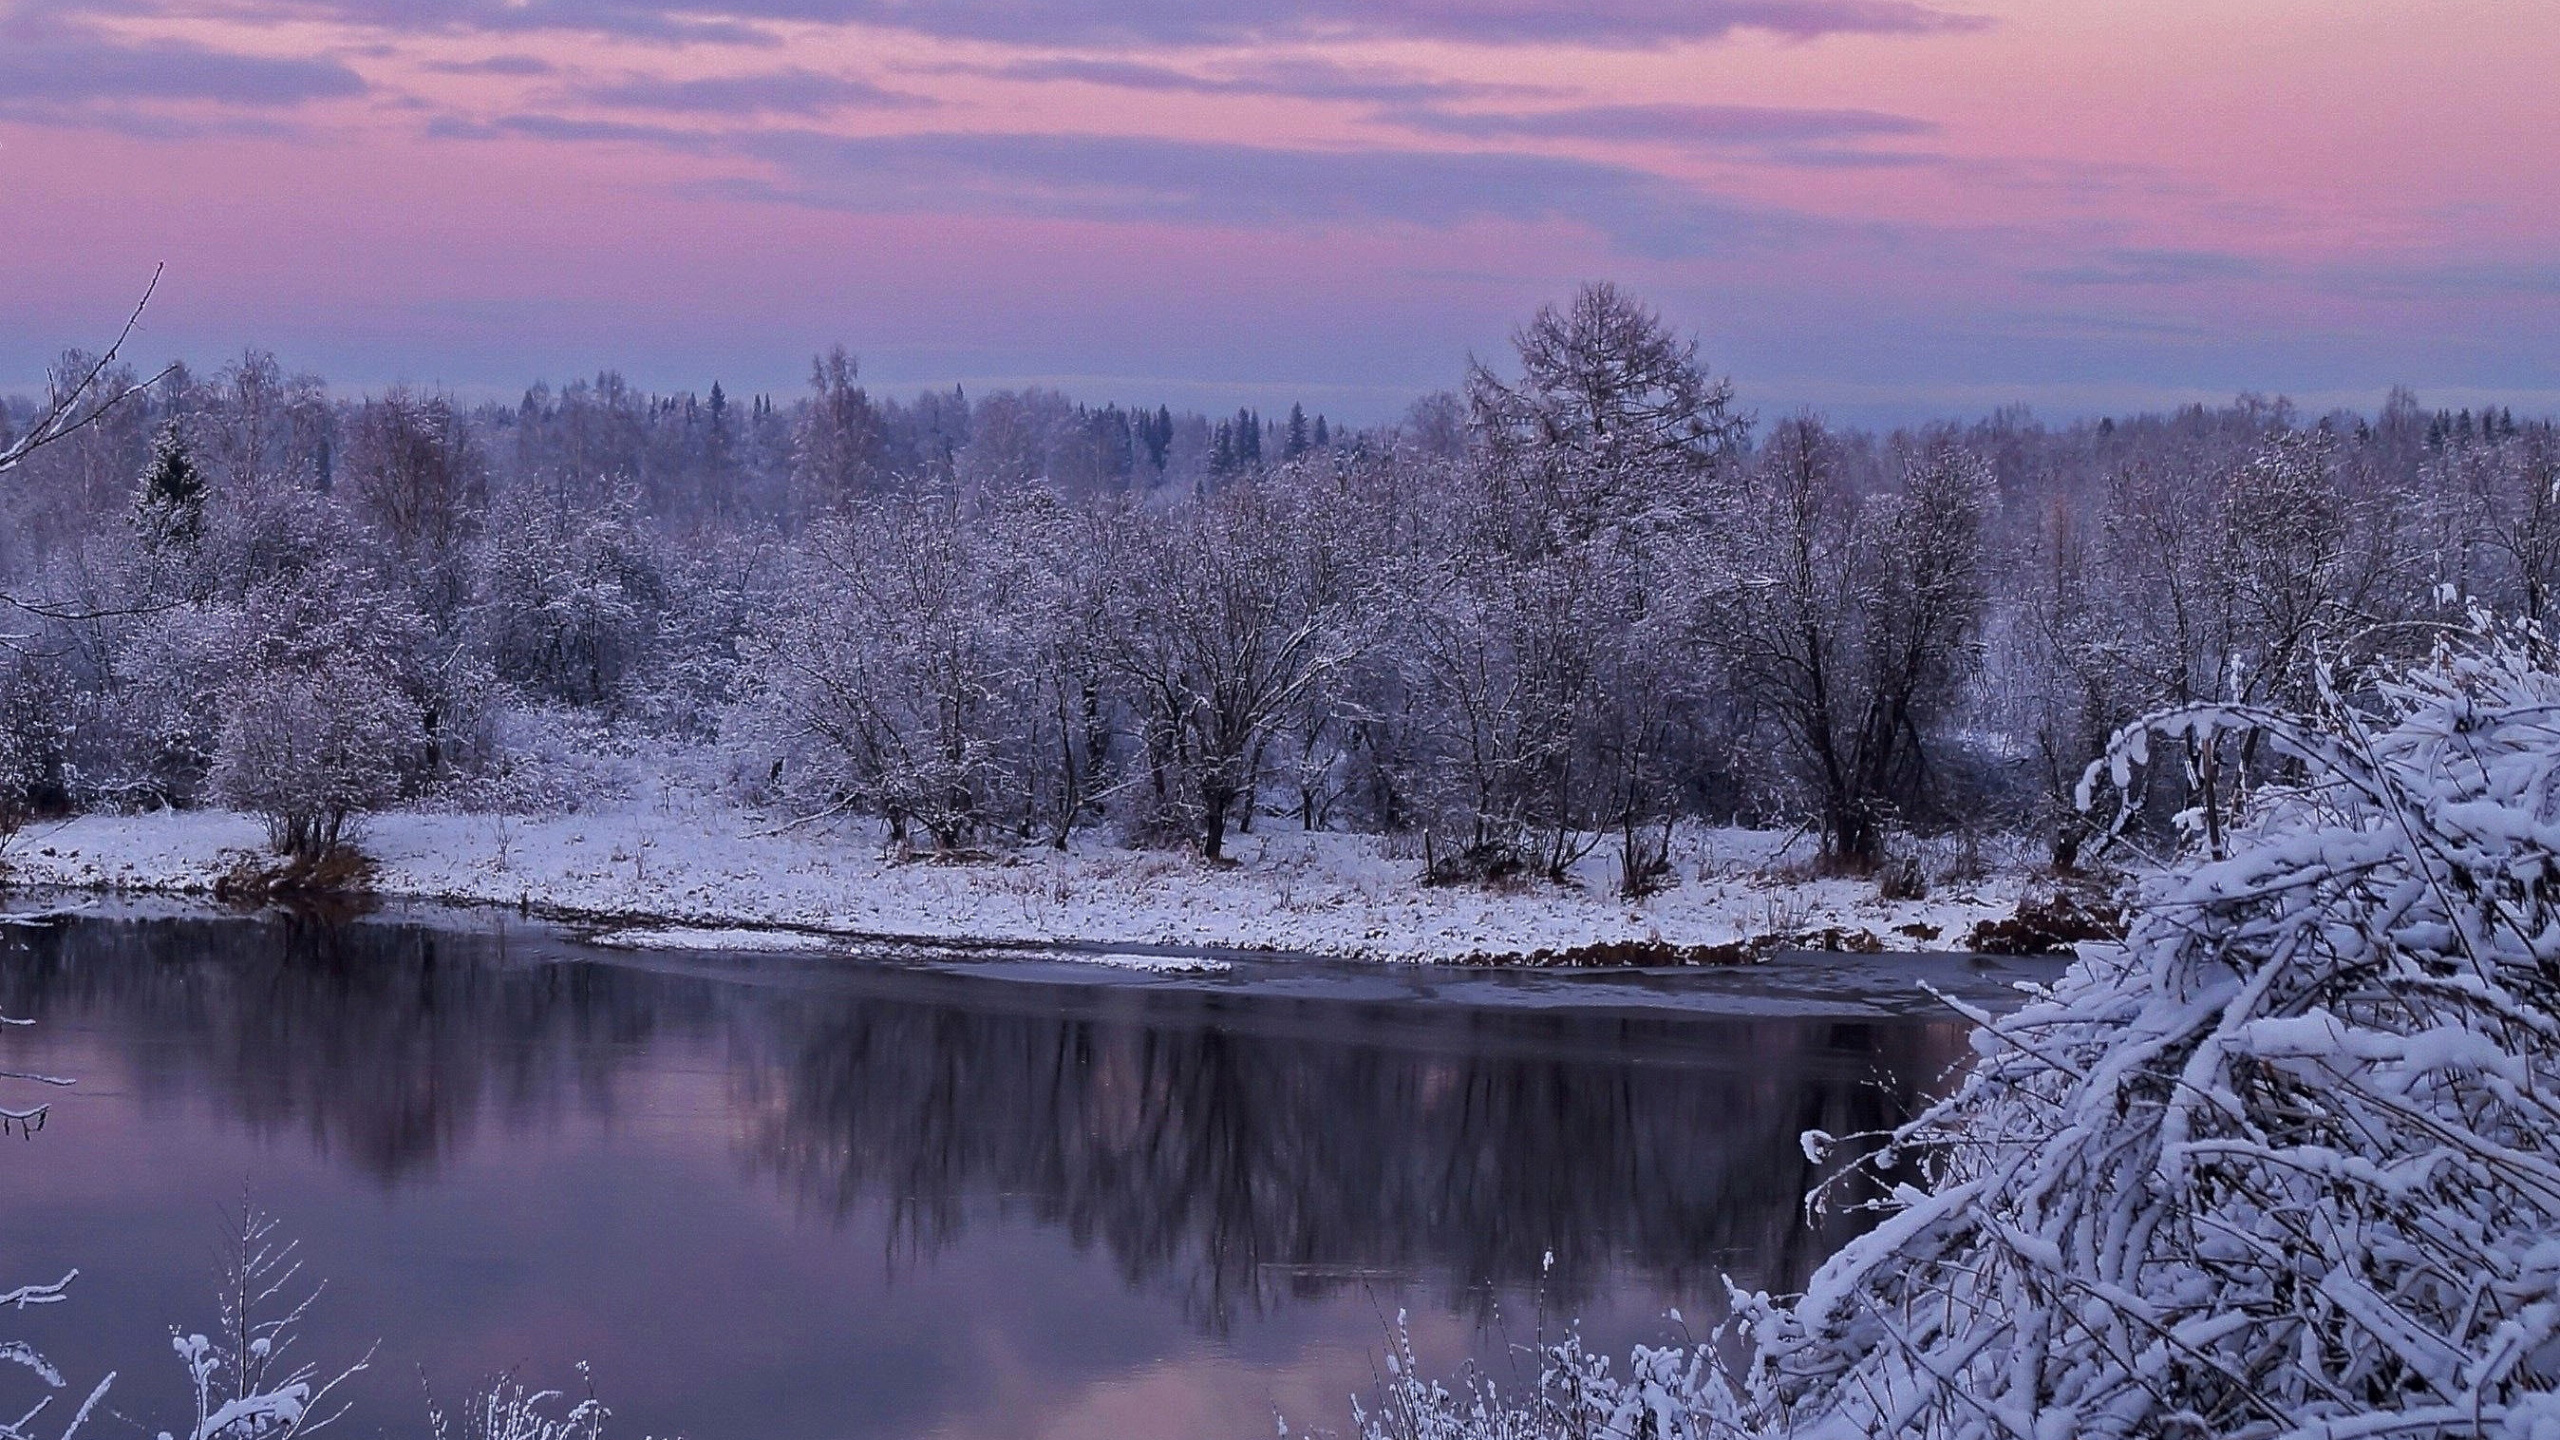 Snow Covered Trees Beside River During Daytime. Wallpaper in 2560x1440 Resolution